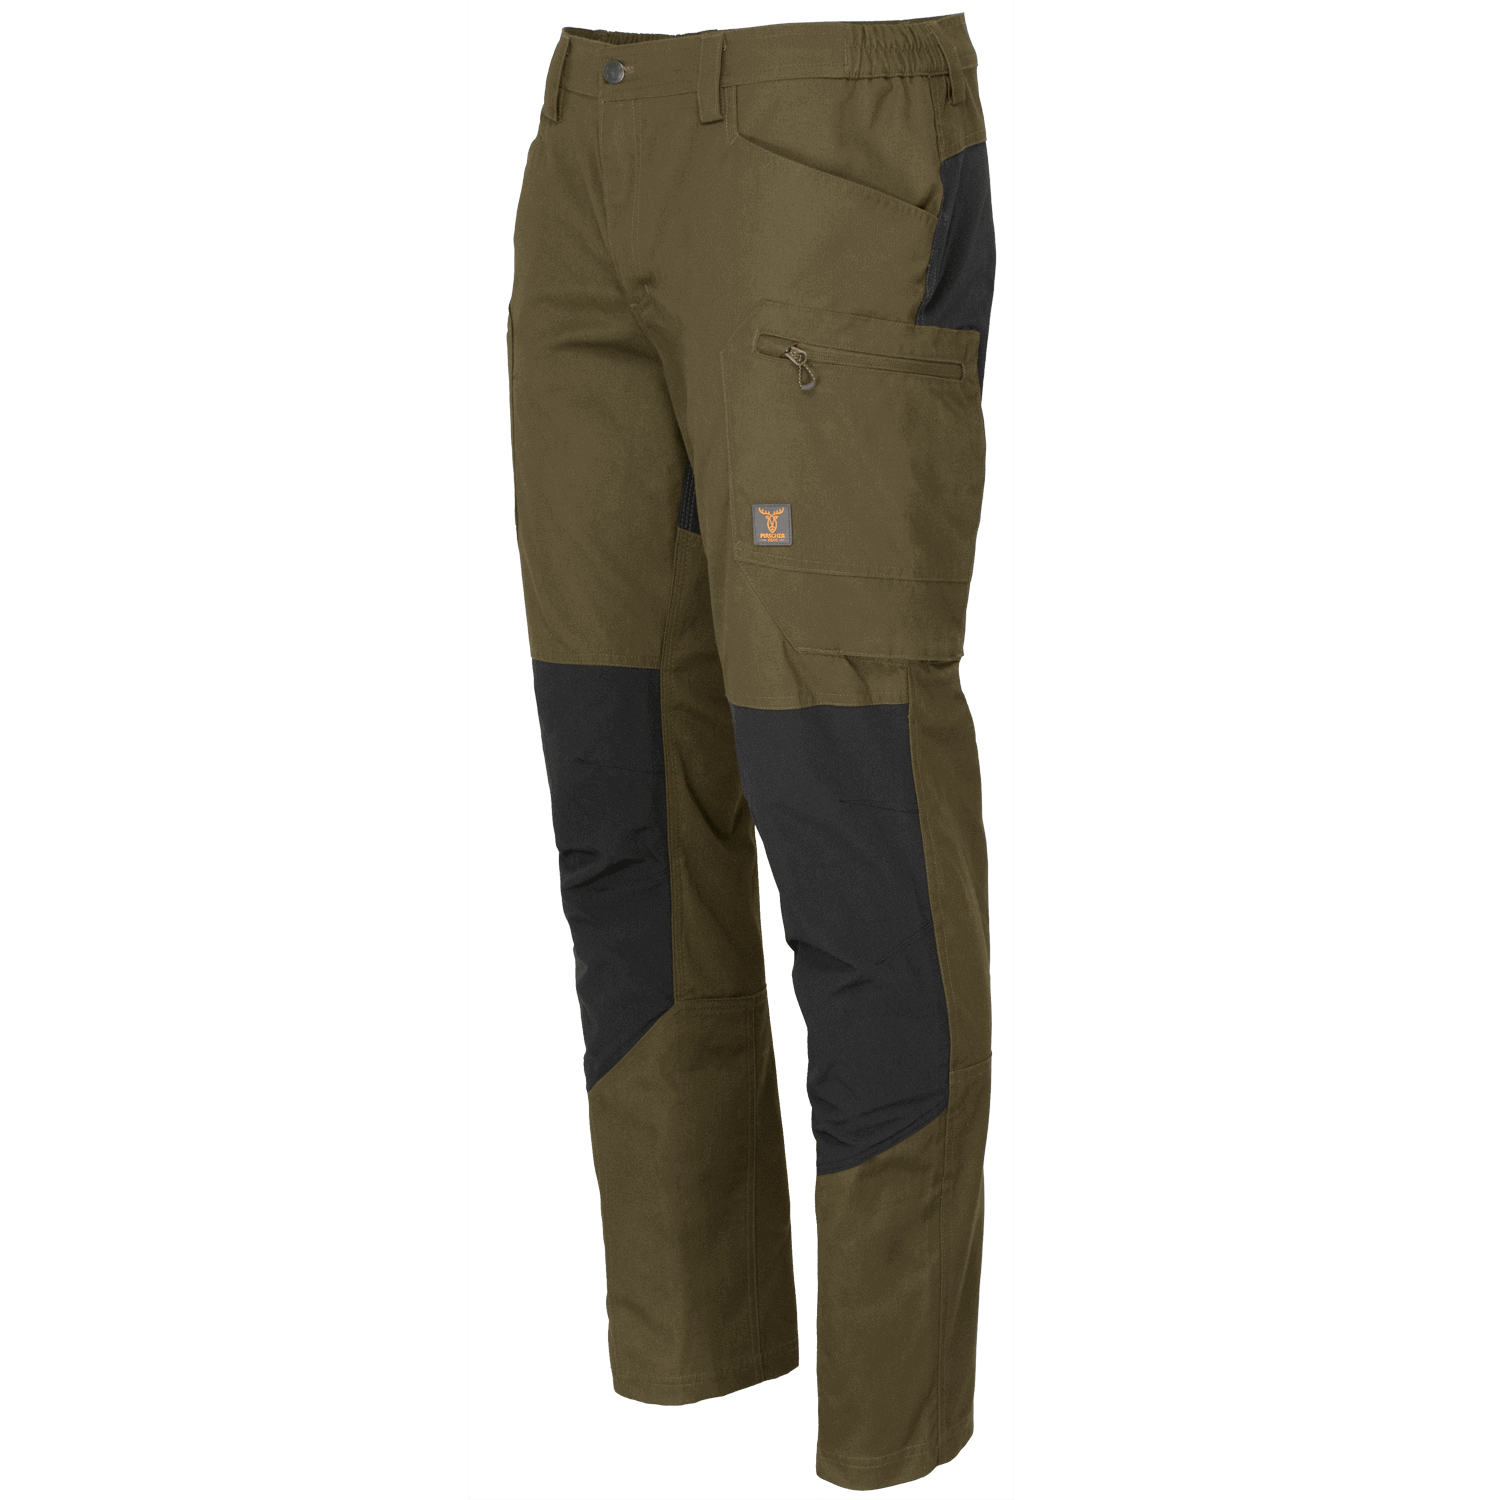 Pirscher Gear Territory Stretch Pants - Summer Hunting Clothing